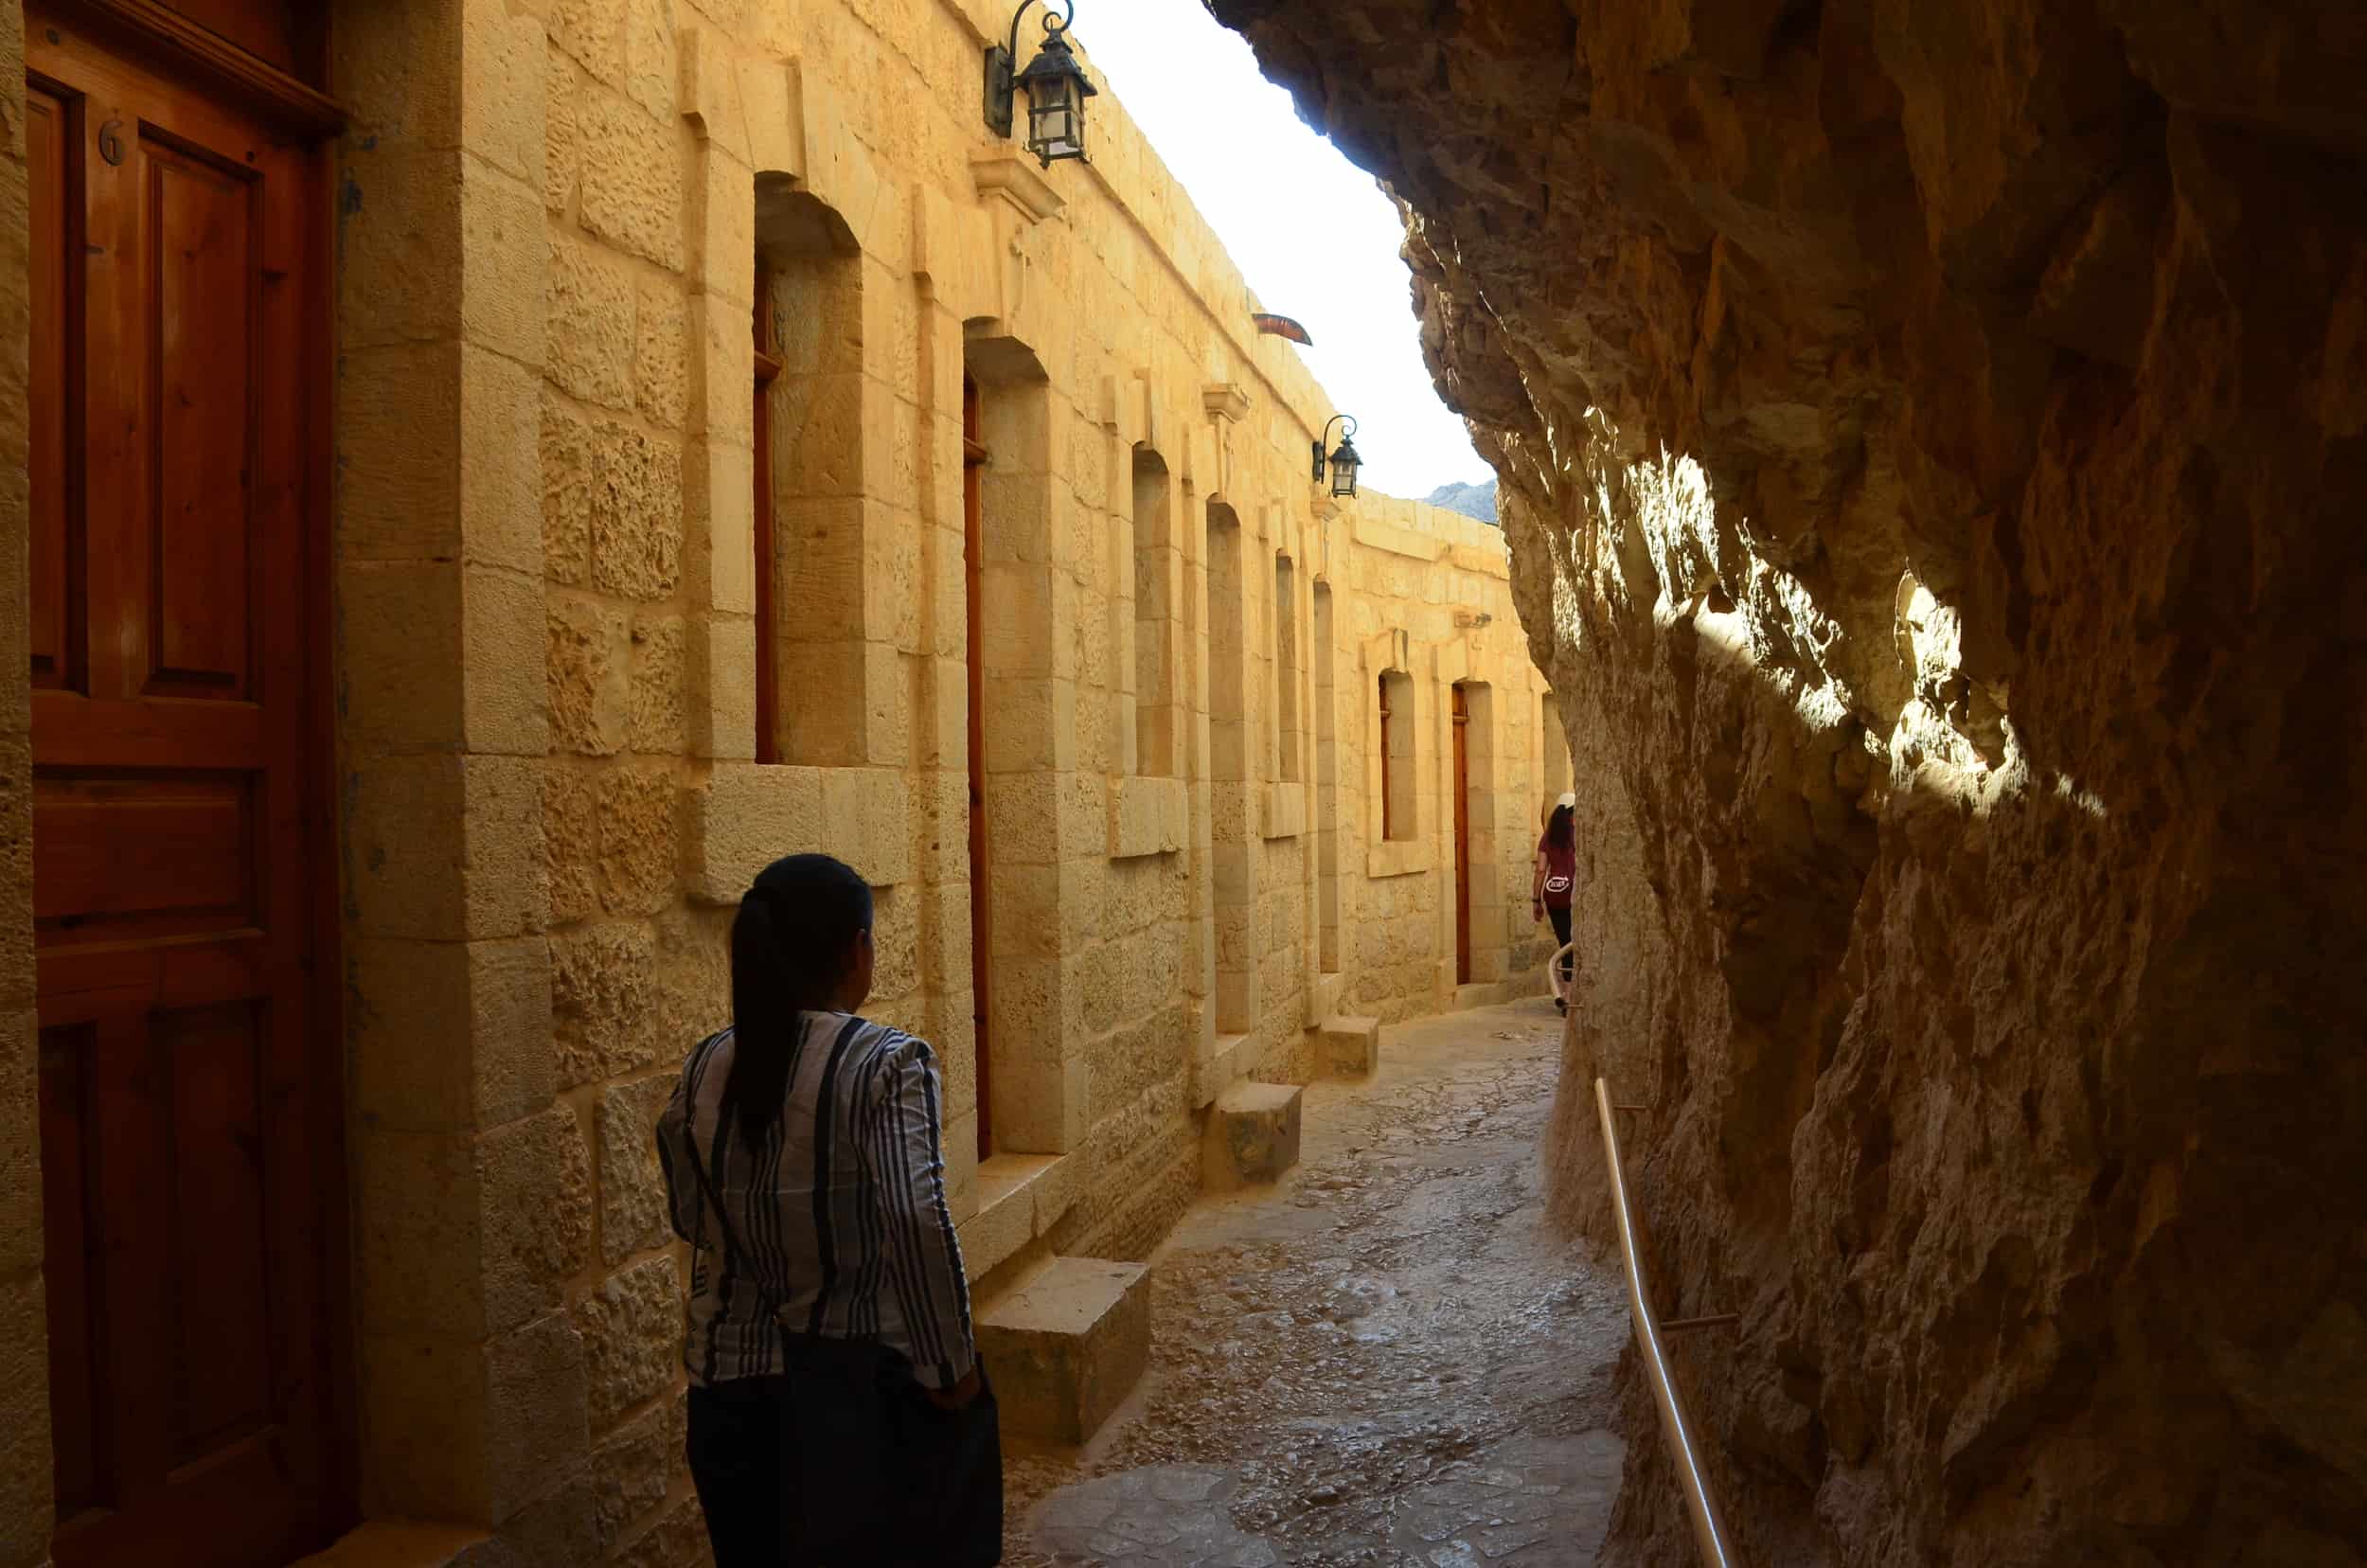 Narrow passage at the Monastery of the Temptation in Jericho, Palestine